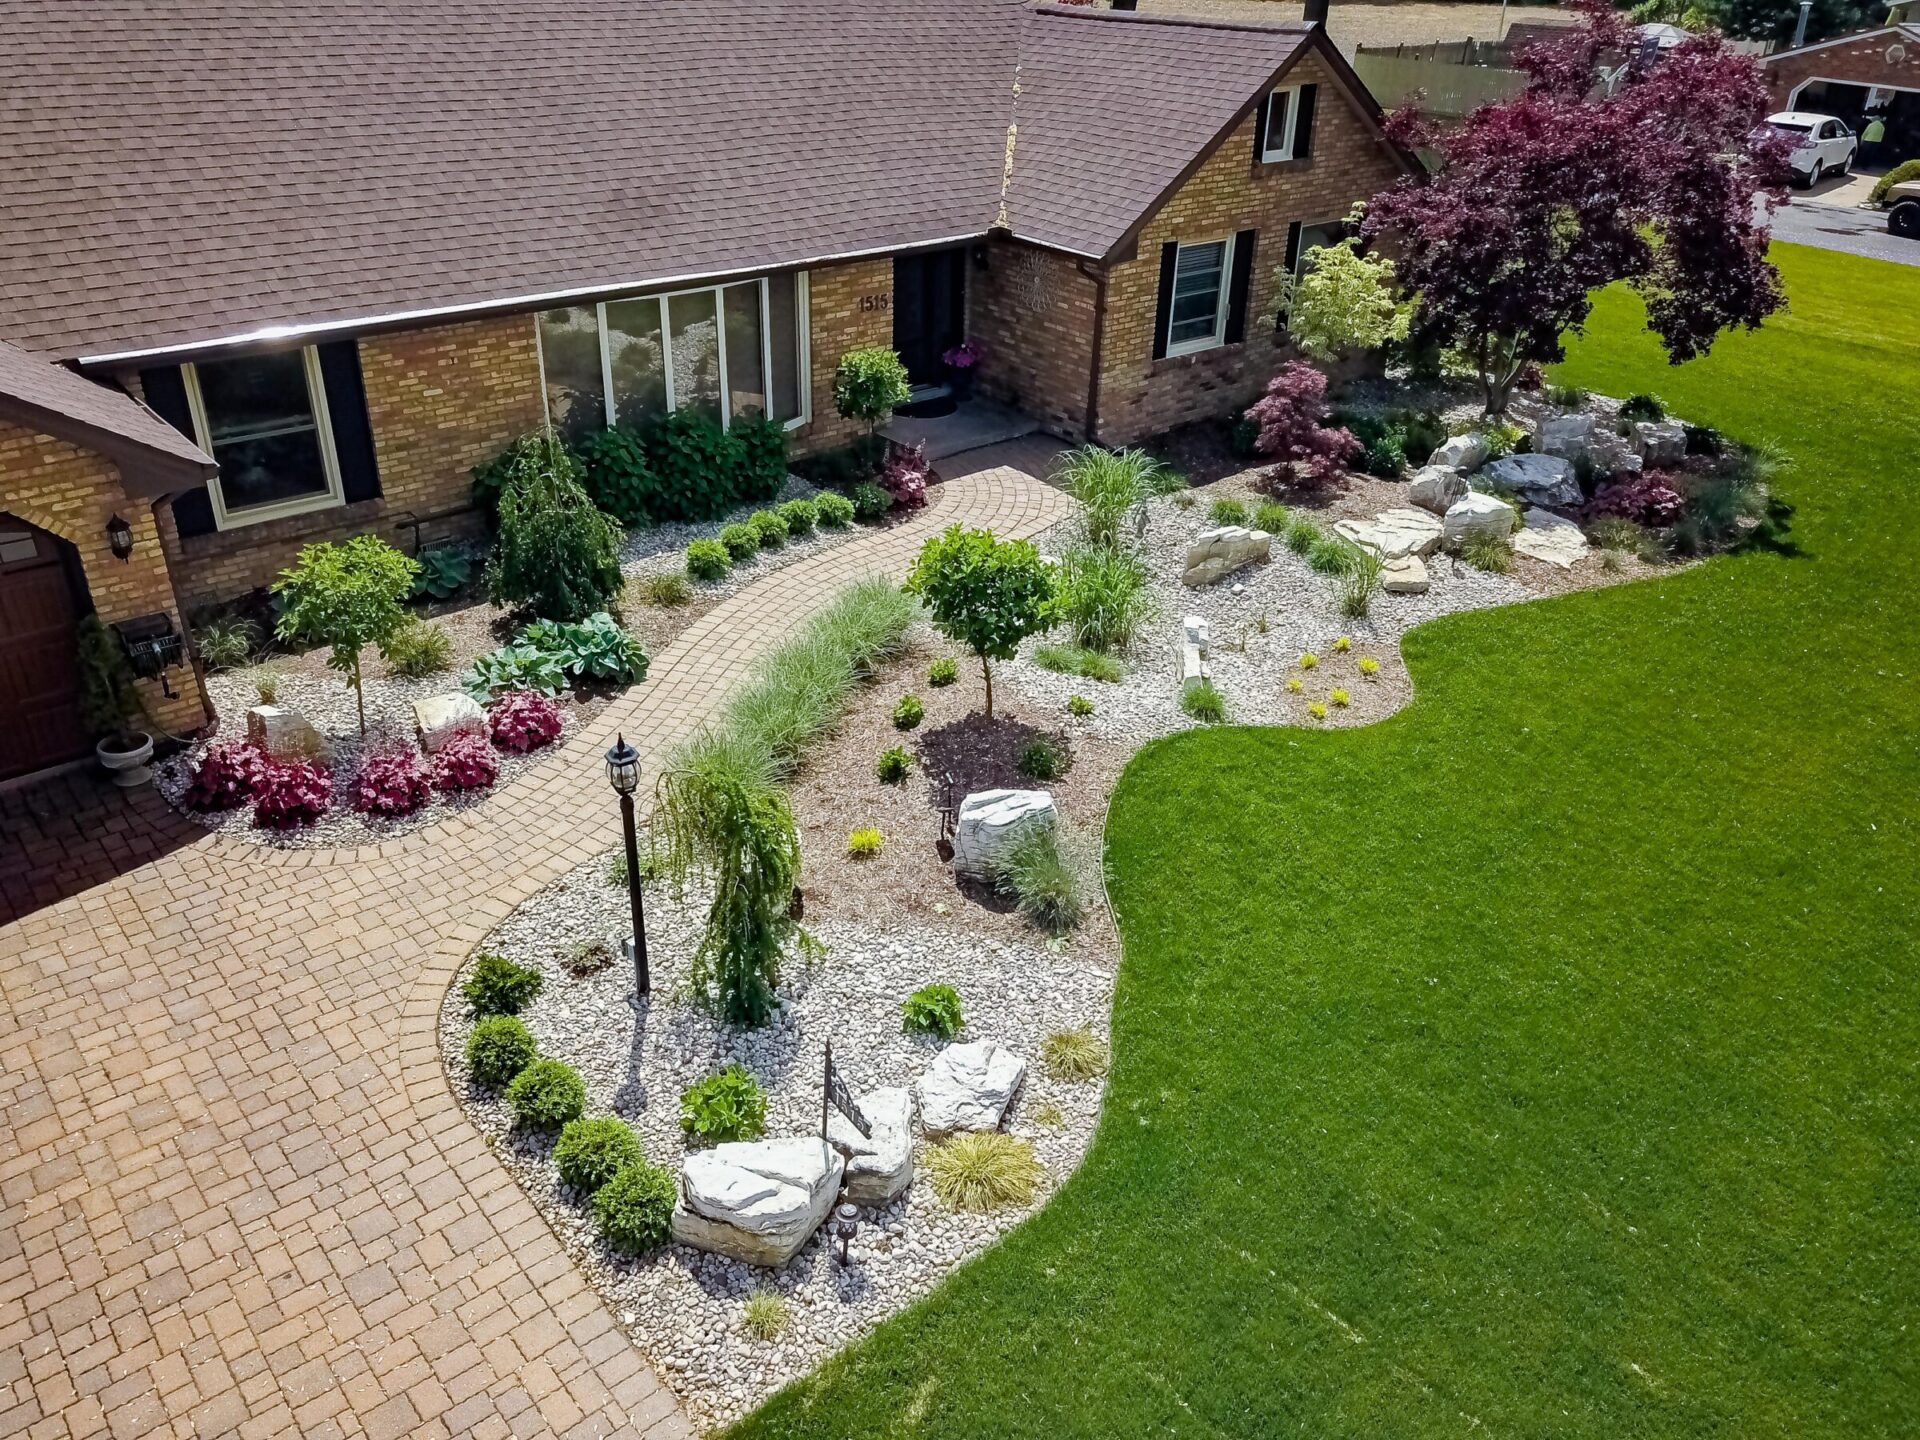 Aerial view of a landscaped front yard with a brick house, curved pathways, lush lawn, assorted plants, decorative rocks, and a lamppost.